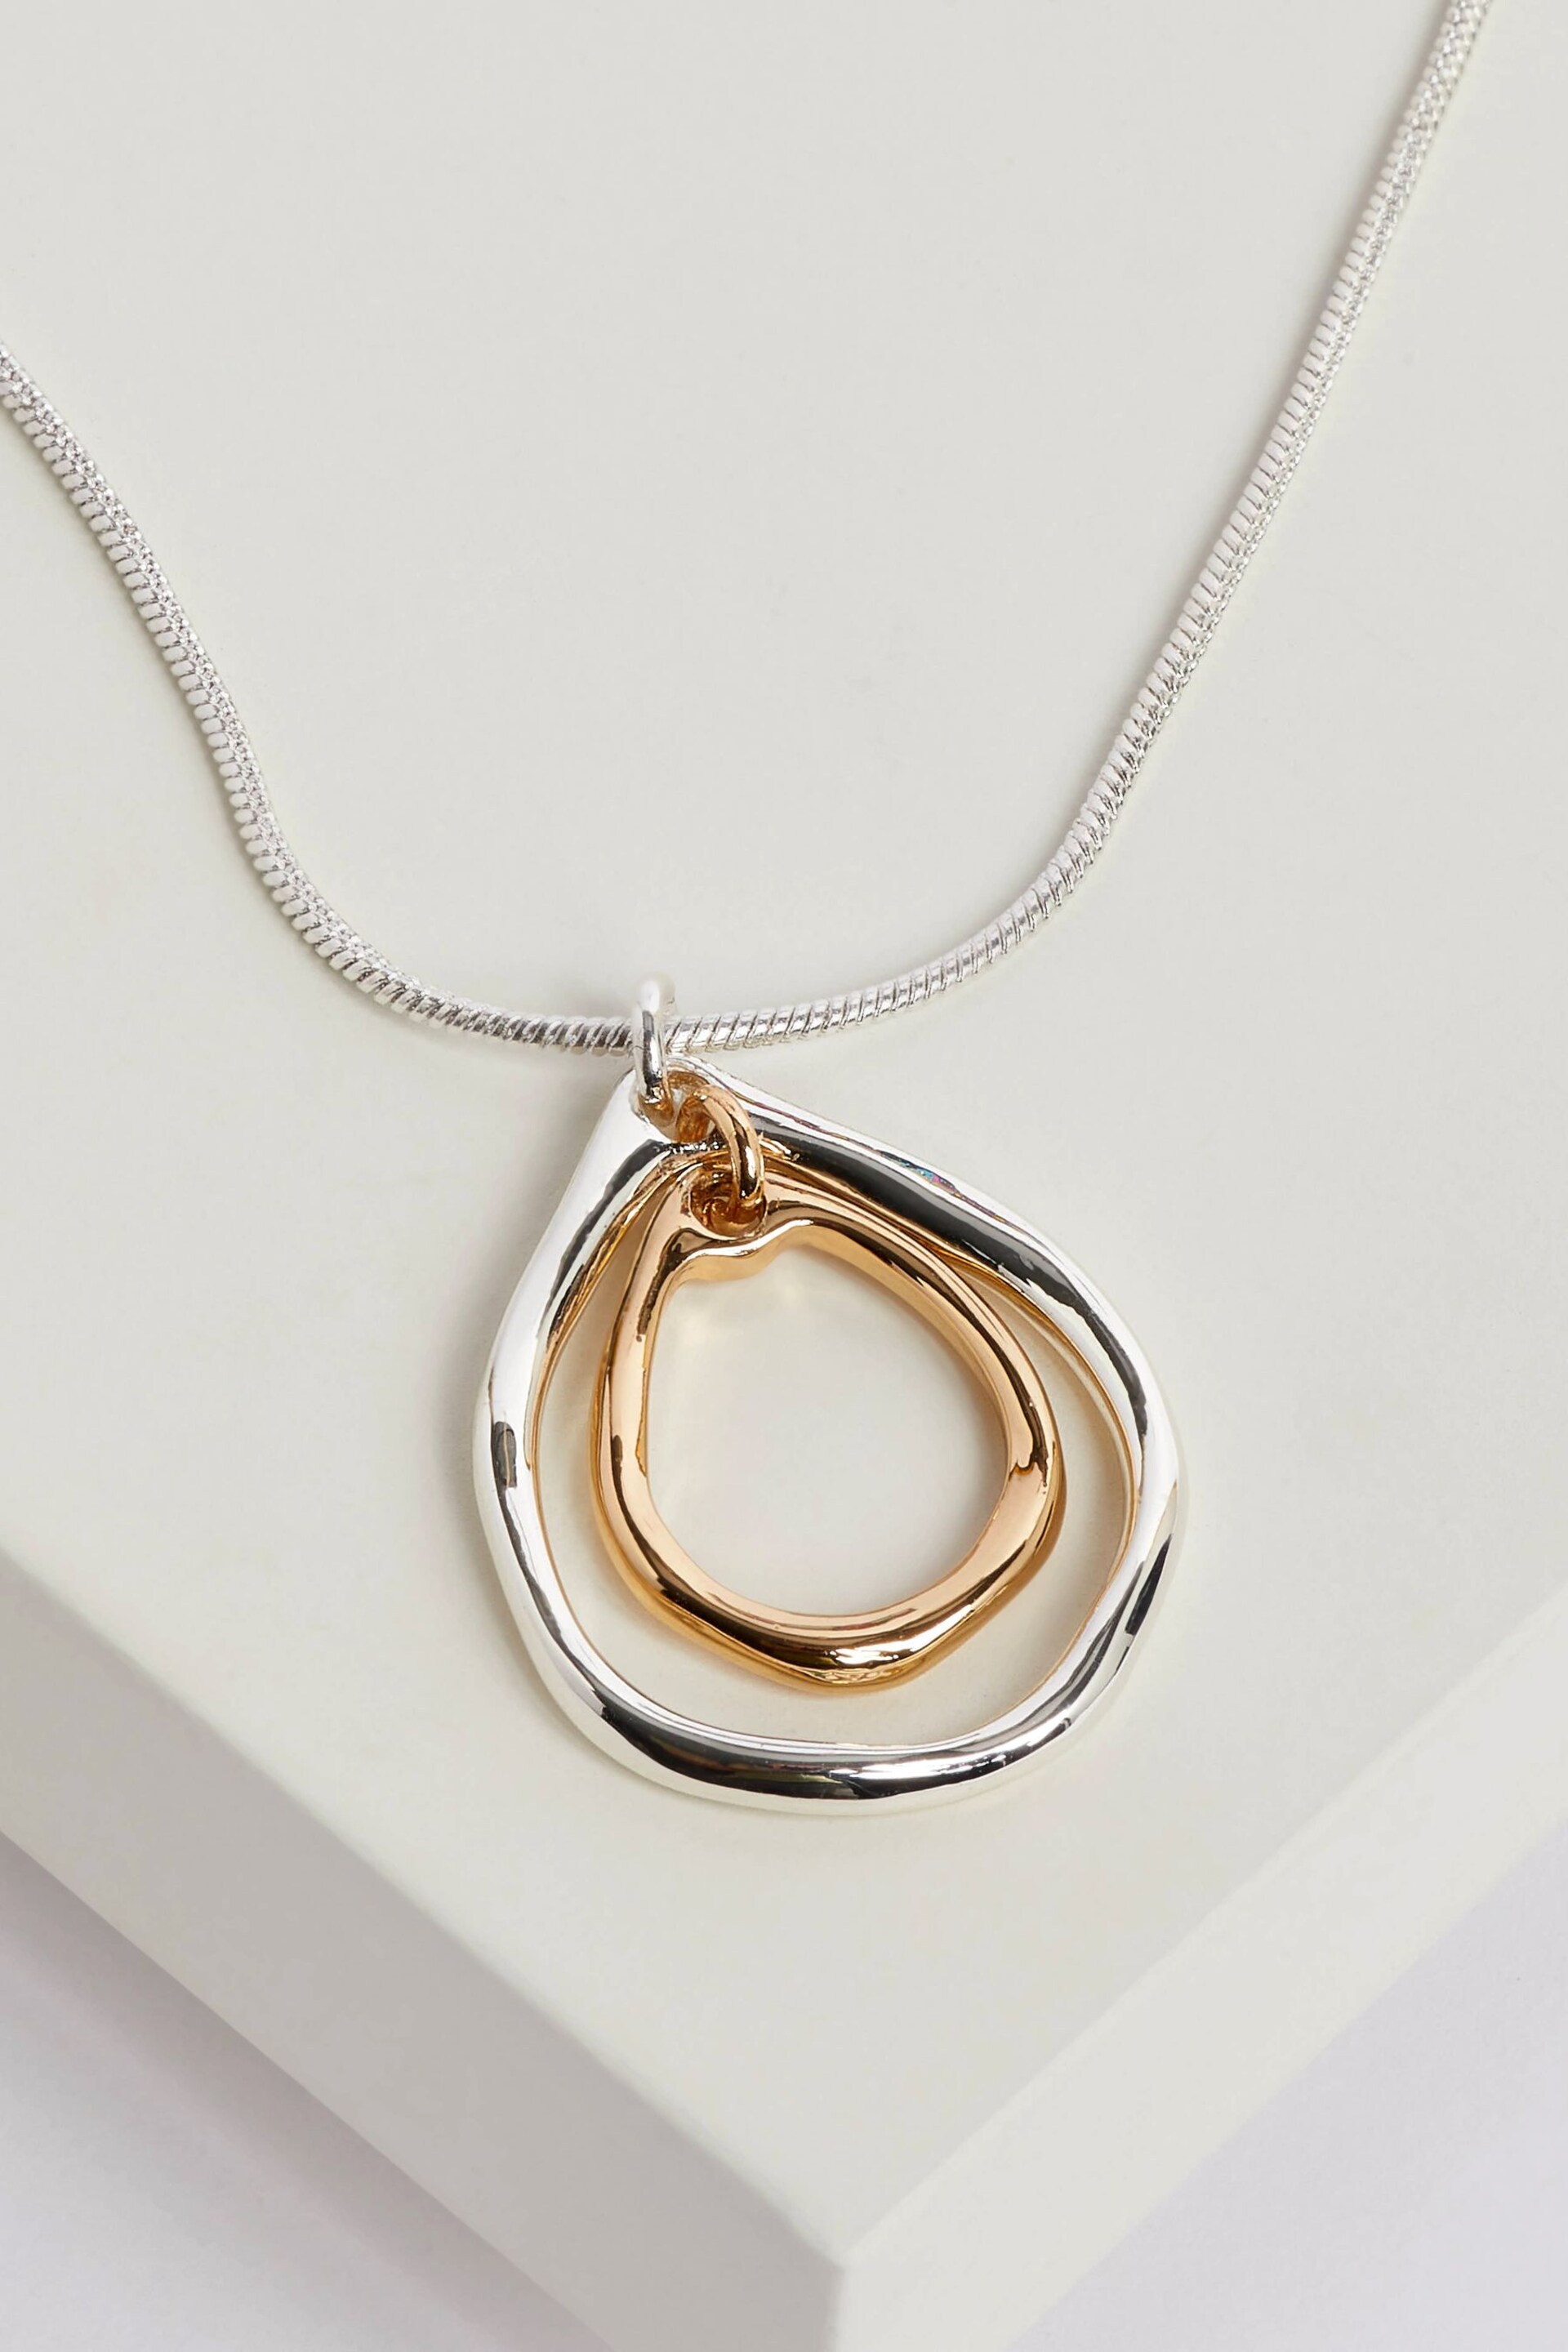 Silver/Gold Tone Recycled Metal Teardrop Necklace - Image 4 of 4